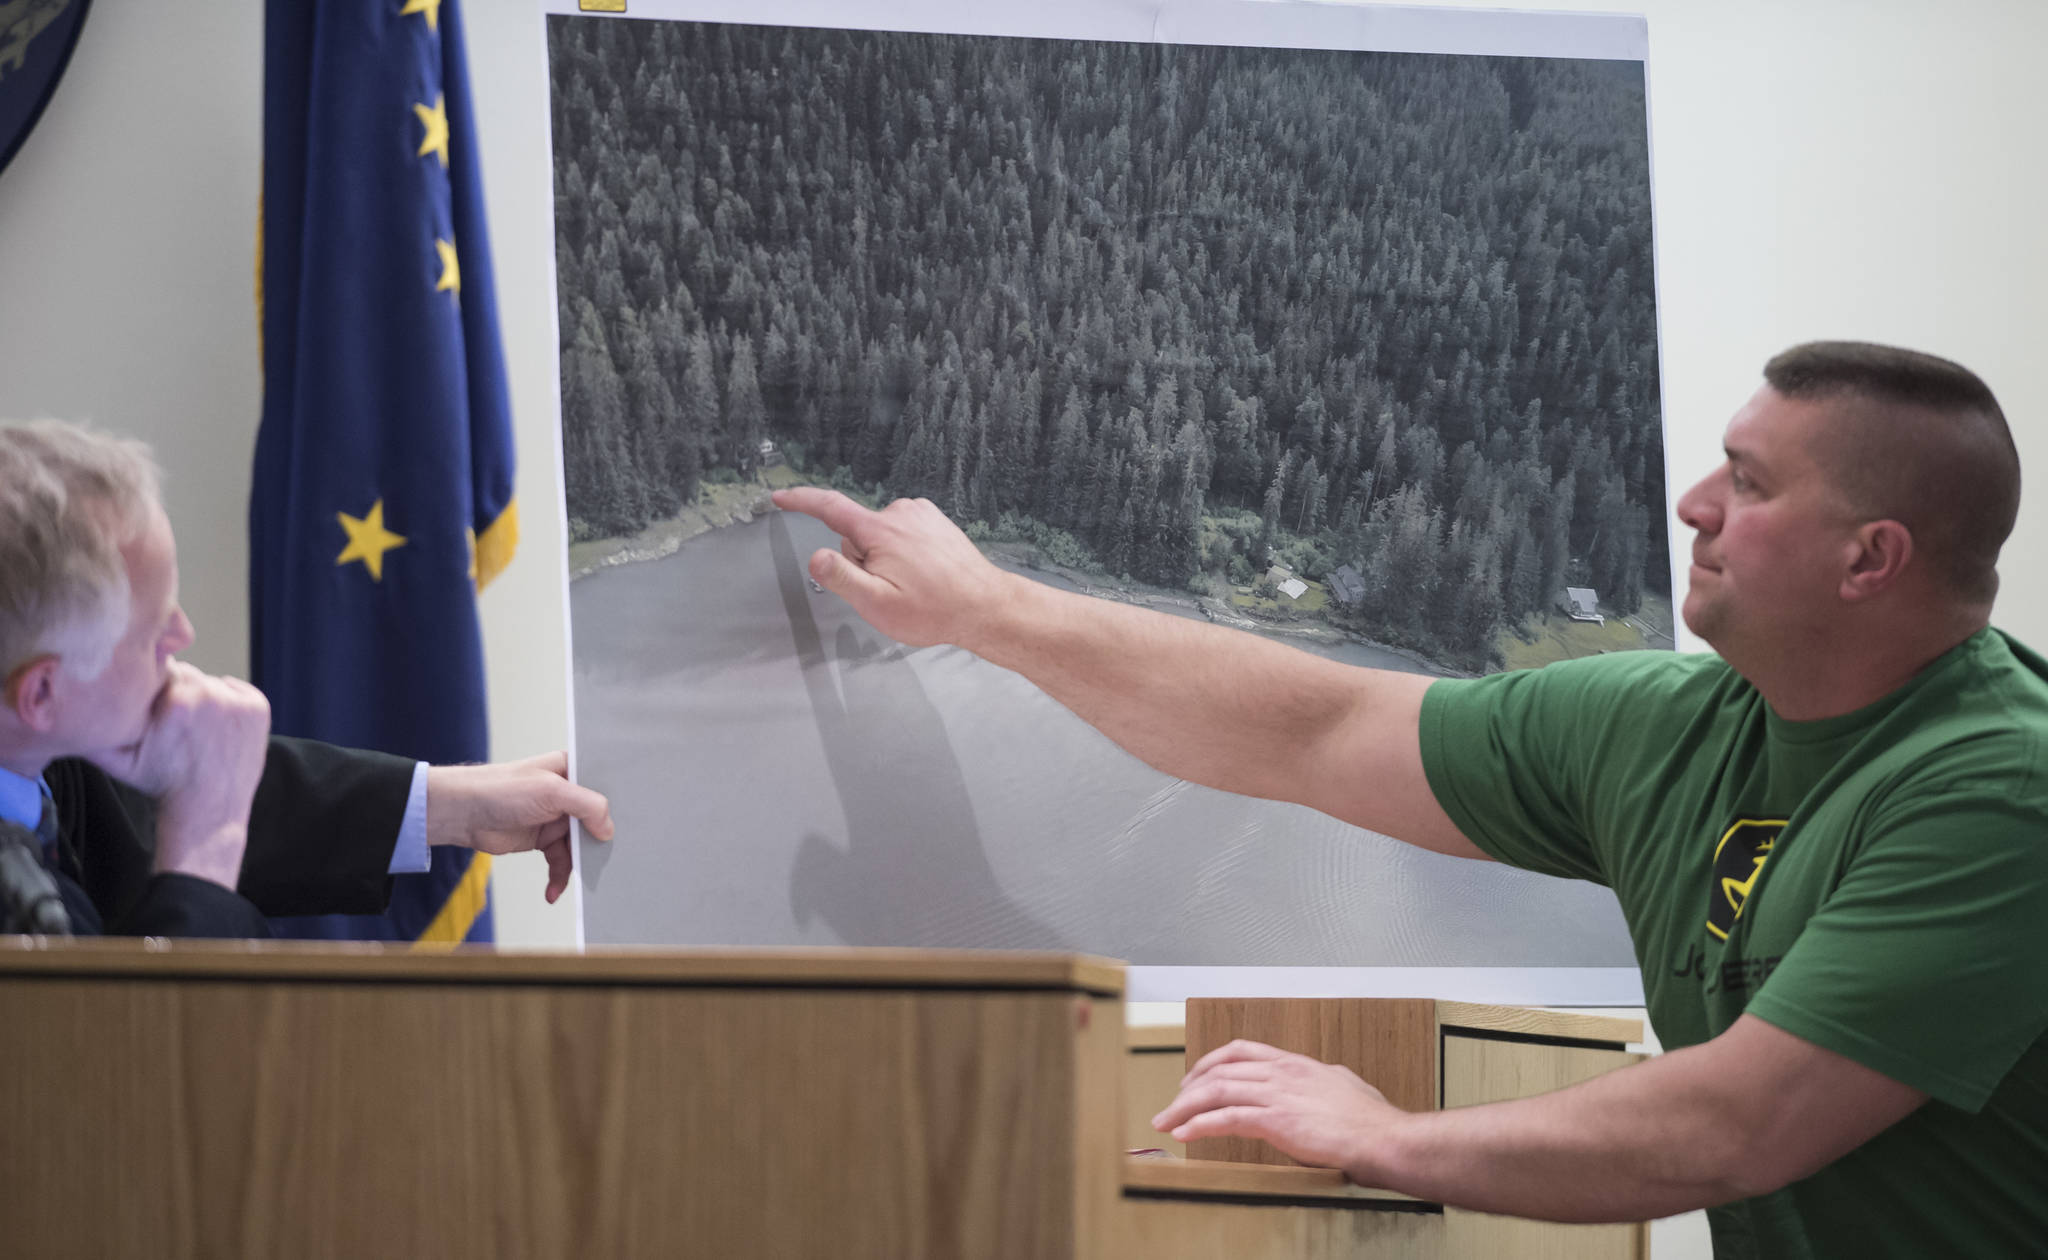 Witness Seth Bradshaw points to where he found the body Duilio Antonio “Tony” Rosales at an Excursion Inlet cabin while Juneau Superior Court Judge Philip Pallenberg holds a map during the trial of Mark De Simone in Juneau Superior Court on Monday, April 30, 2018. De Simone is accused of killing Rosales during a hunting trip in Excursion Inlet in 2016. Bradshaw was the first person to find Rosales. (Michael Penn | Juneau Empire)